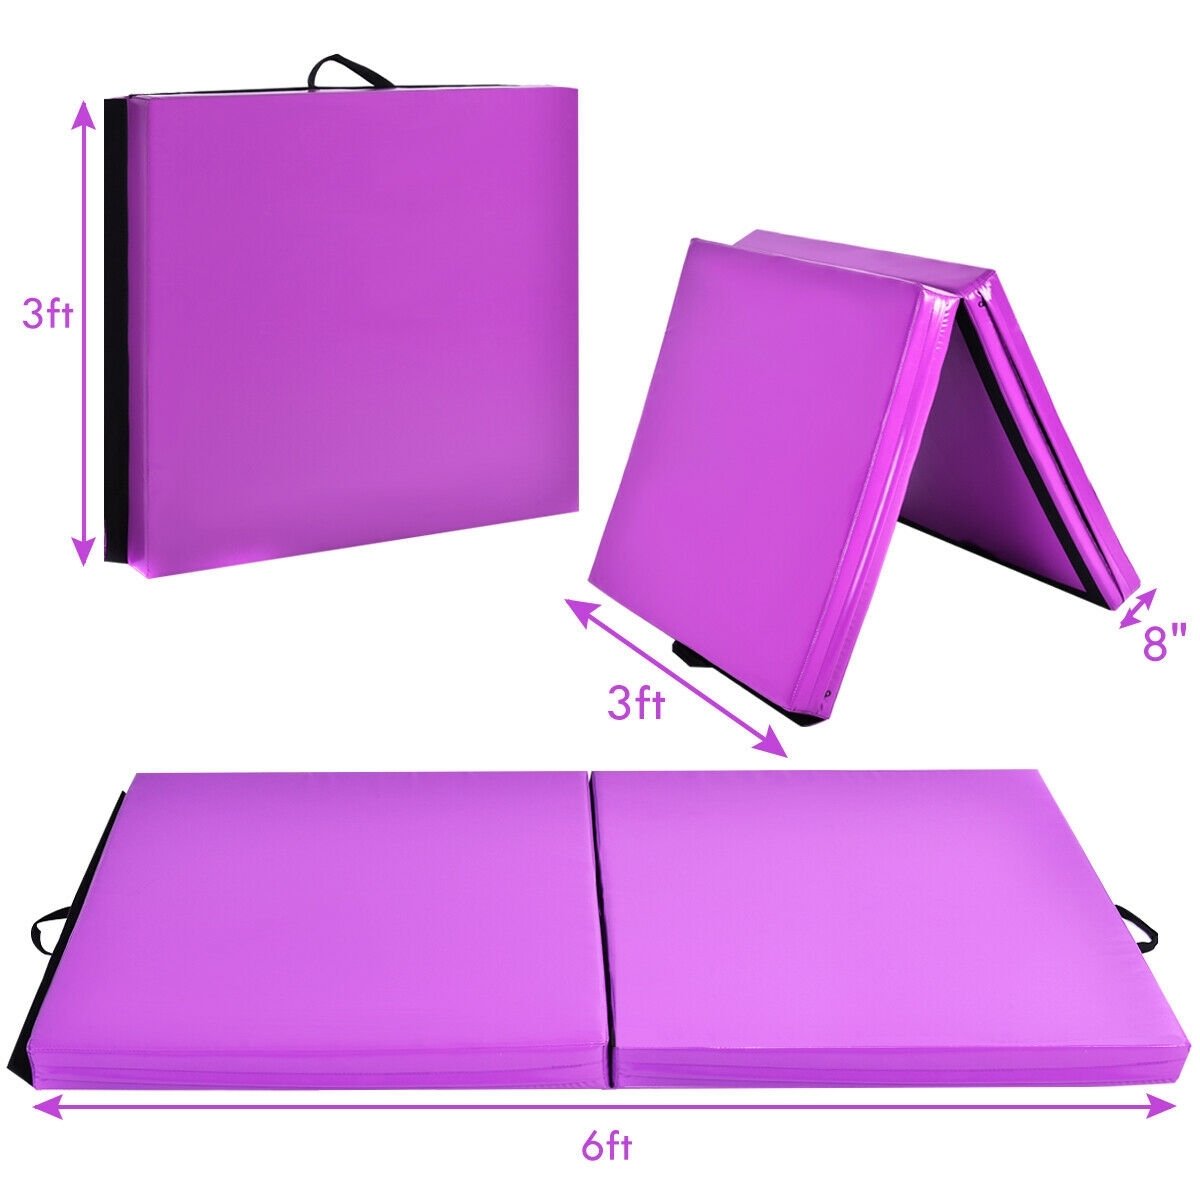 6 x 2 Feet Gymnastic Mat with Carrying Handles for Yoga, Purple